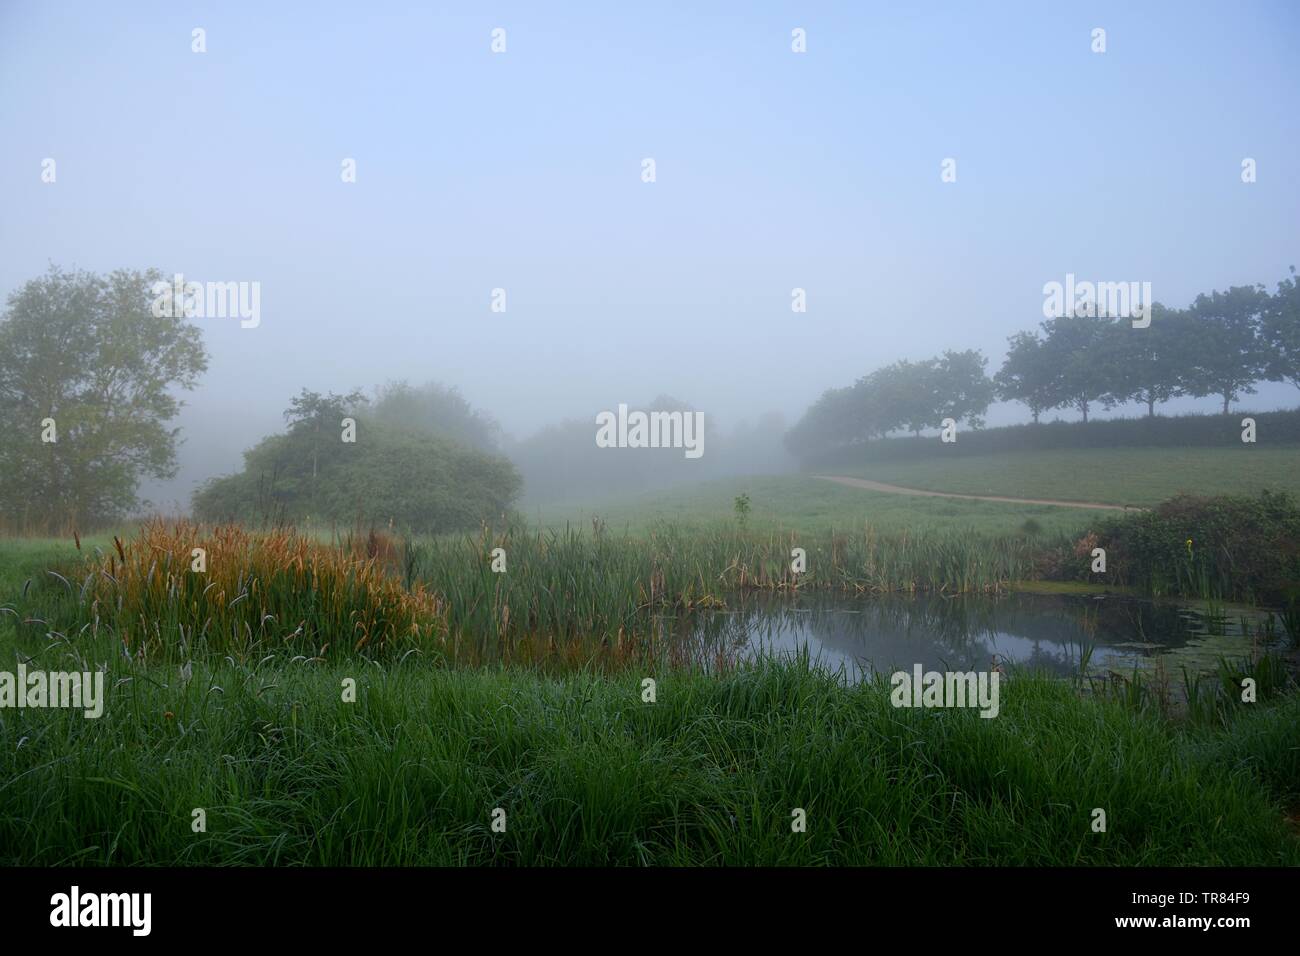 landscapes with water and misty mornings Stock Photo